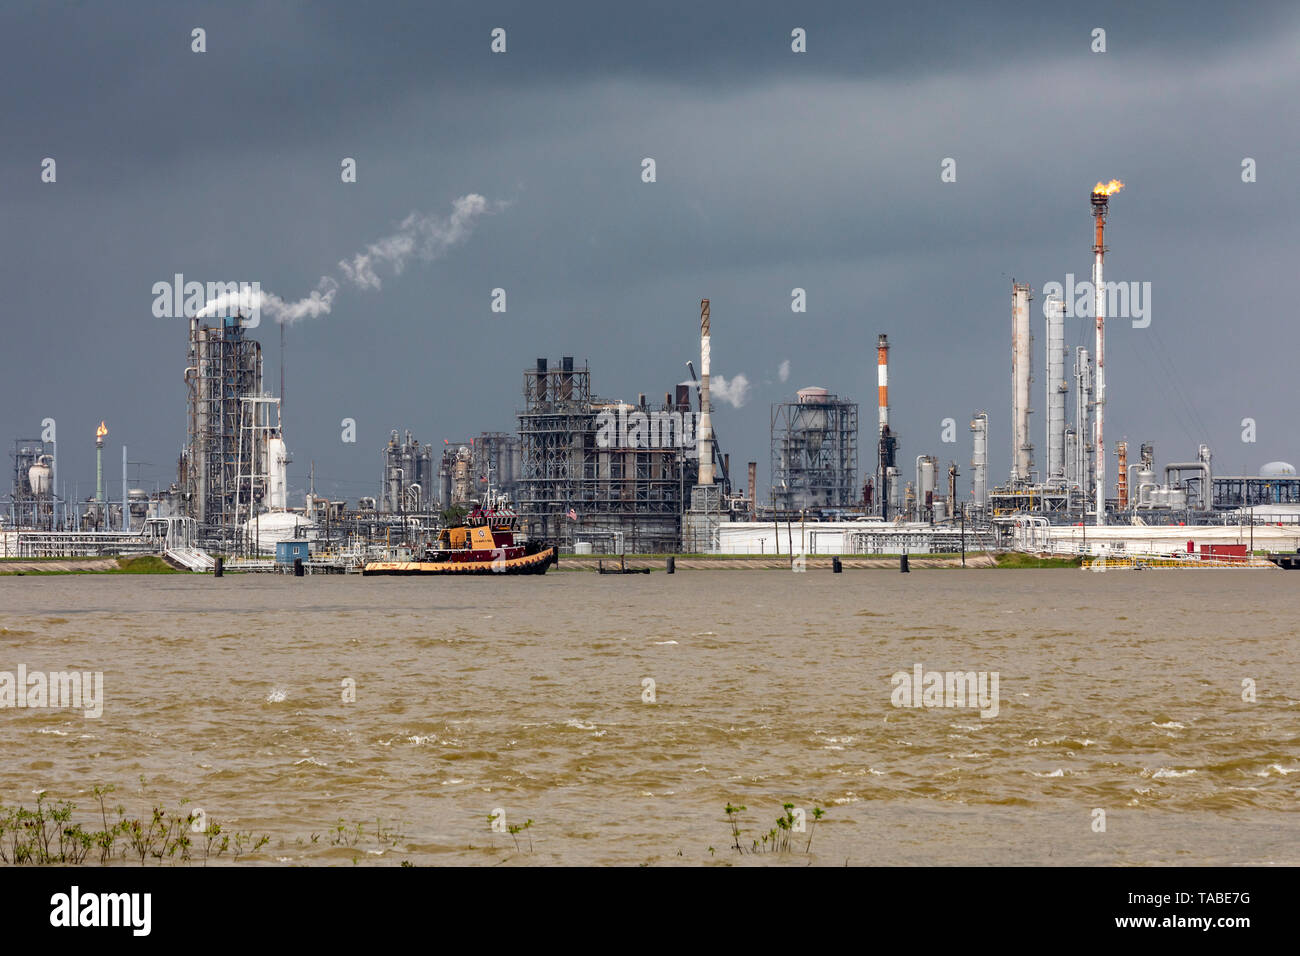 Hahnville, Louisiana - Dow Chemical's petrochemical manufacturing complex on the west bank of the Mississippi River. The plant is operated by Dow's su Stock Photo